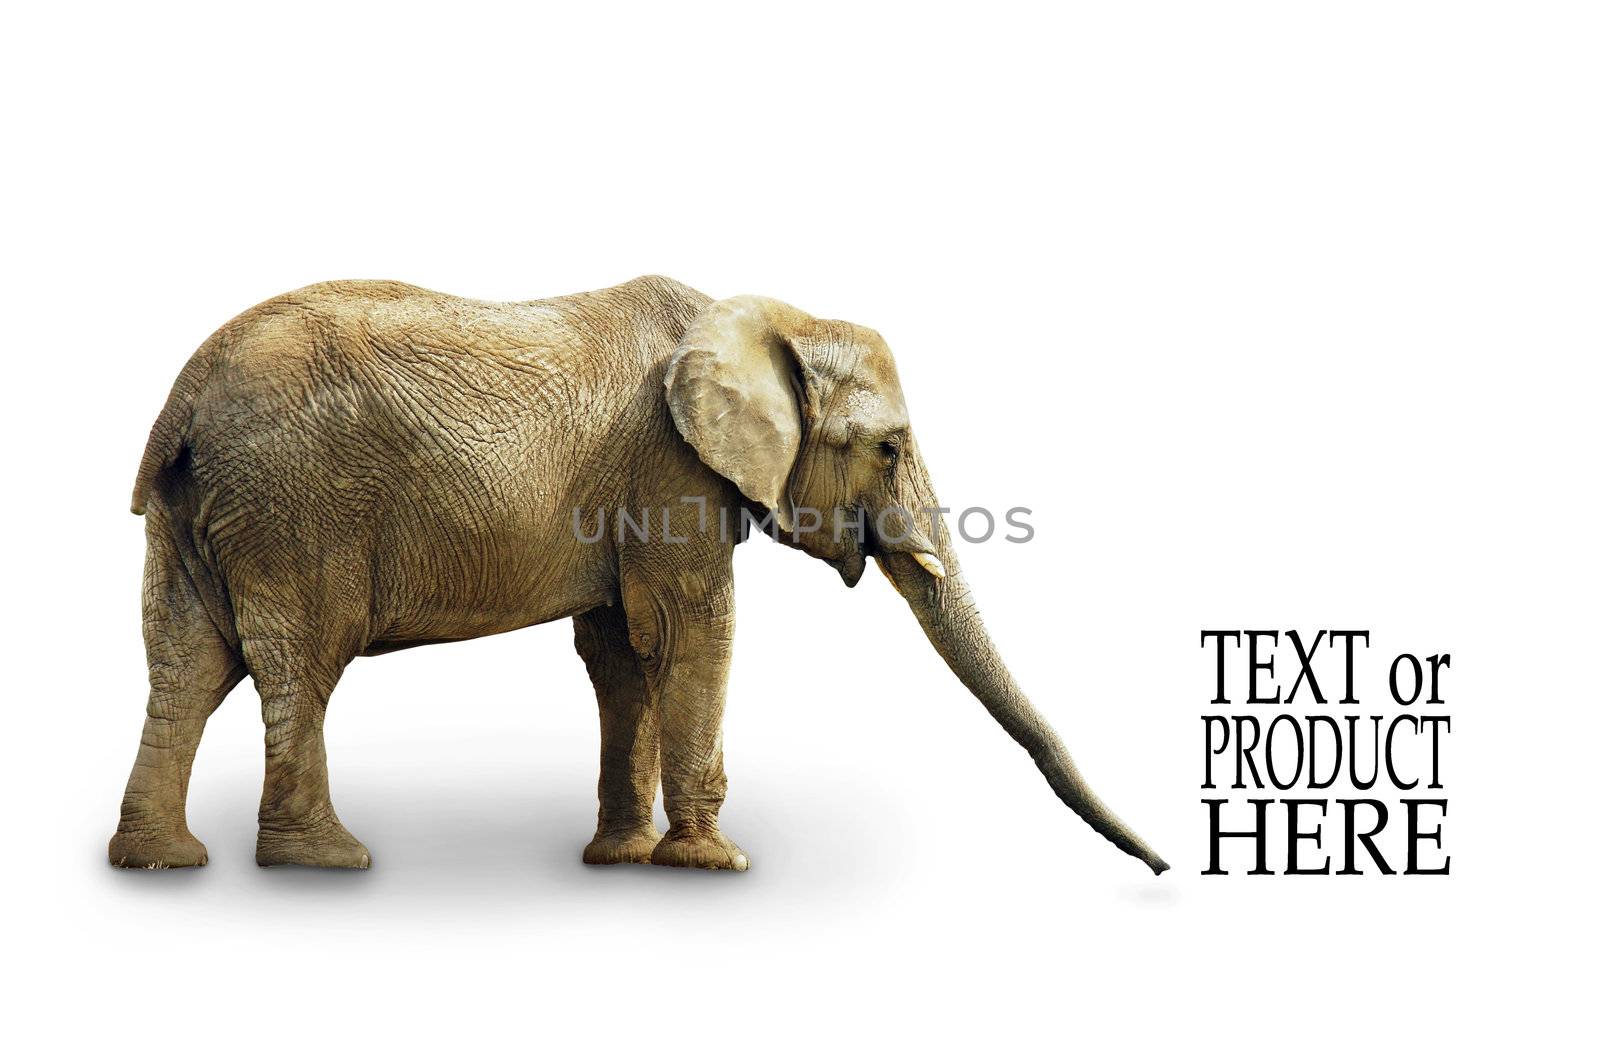 Complete body of African elephant isolated on white background